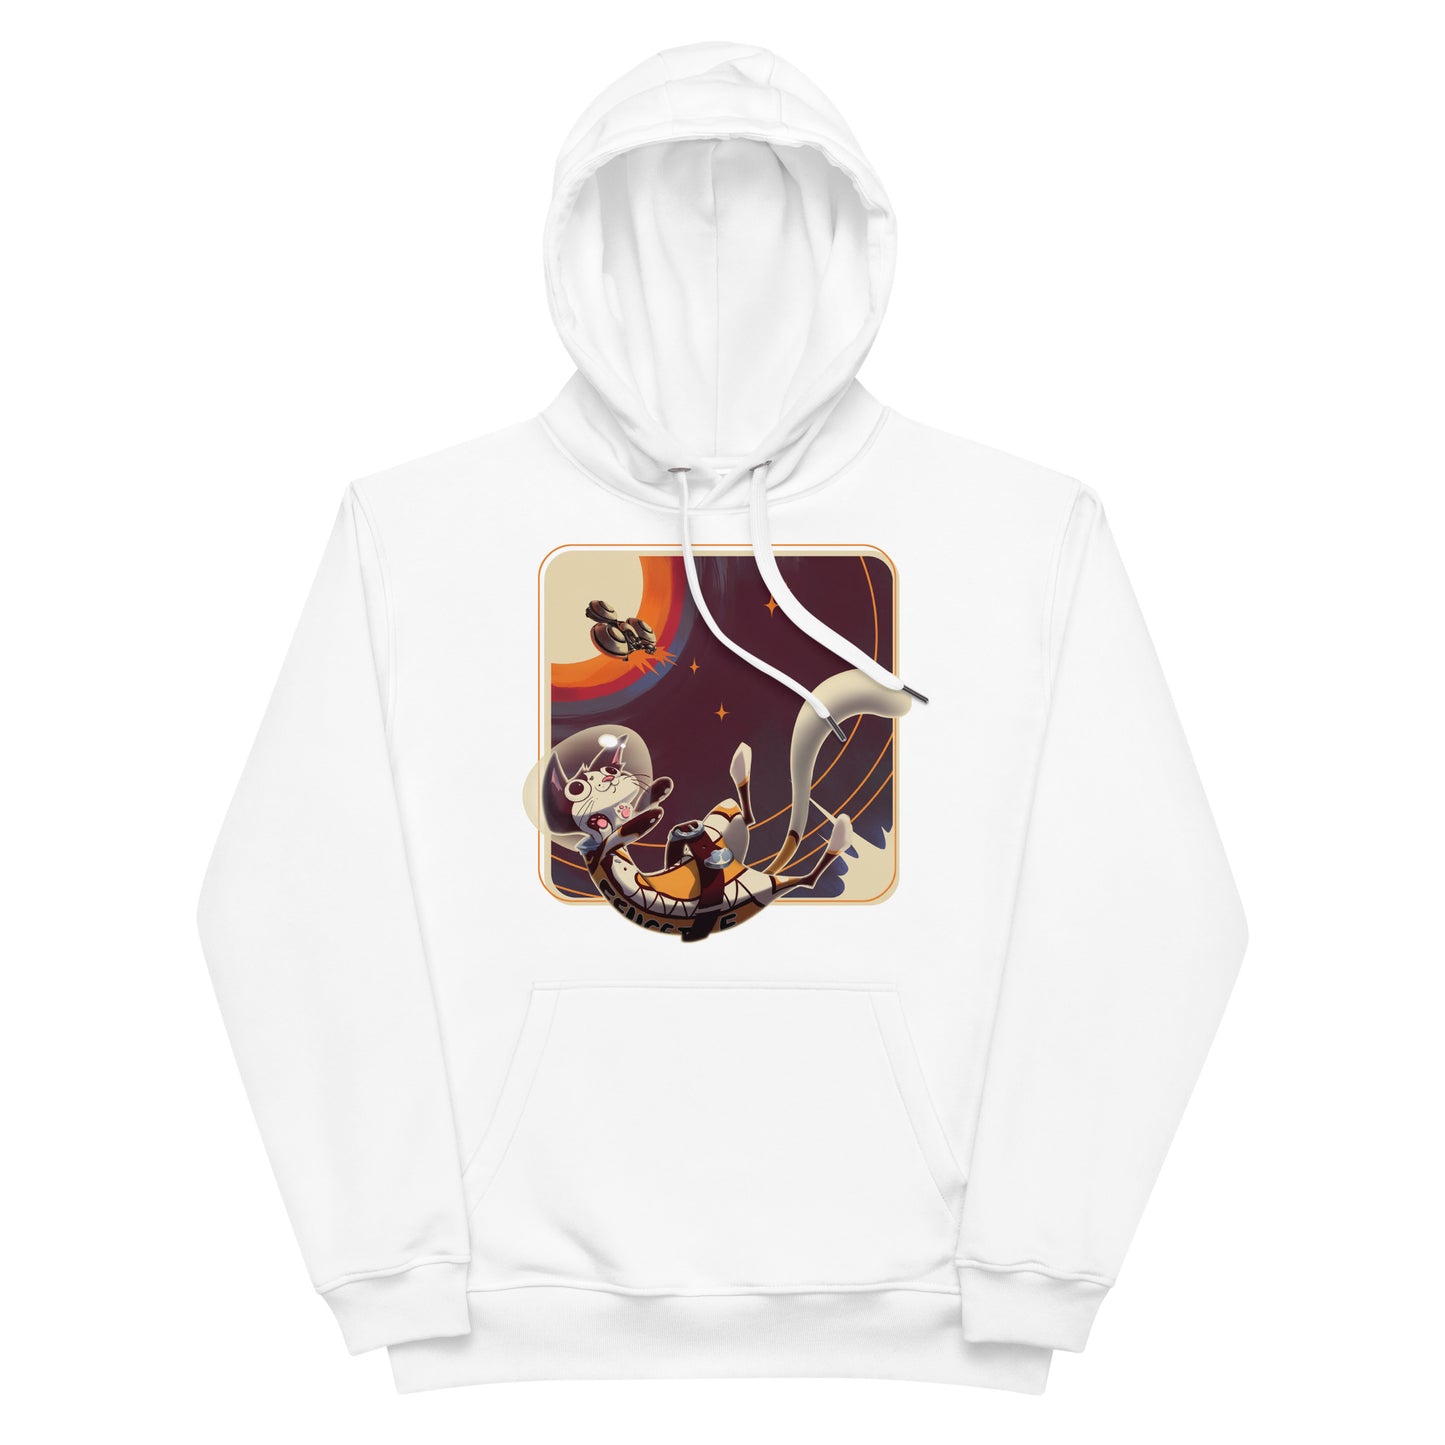 Fluffy Frontier: Premium ECO Hoodie - White hoodie design, embellished with ION's popular board game character, Féllicette